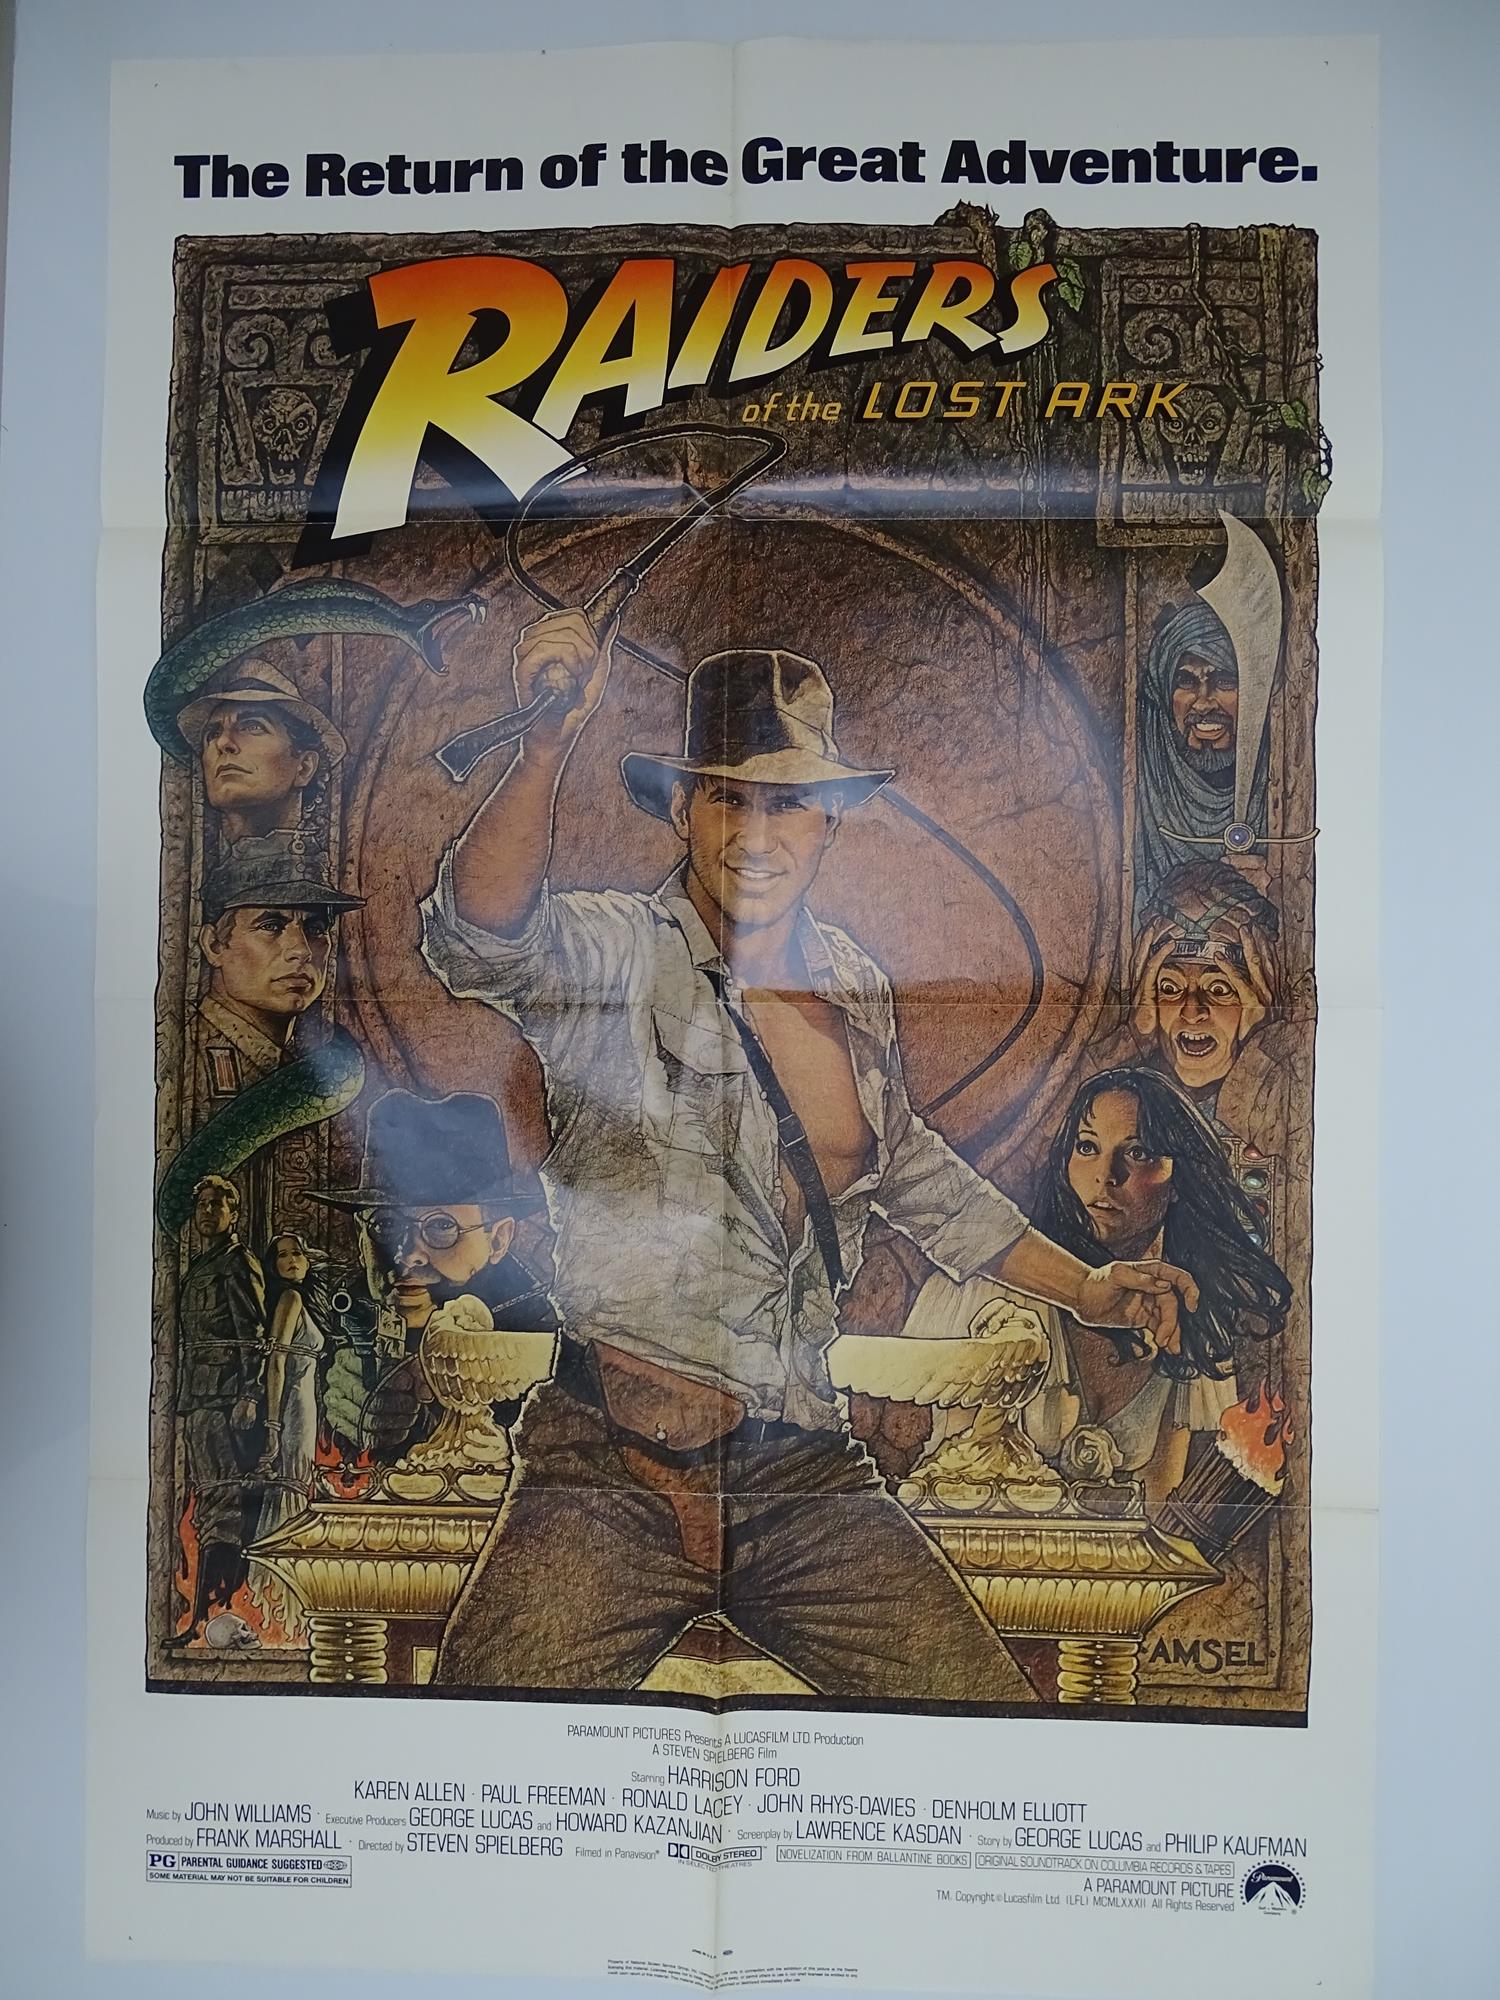 INDIANA JONES AND THE RAIDERS OF THE LOST ARK (1981) - 1982 re-release - Classic STEVEN SPIELBERG